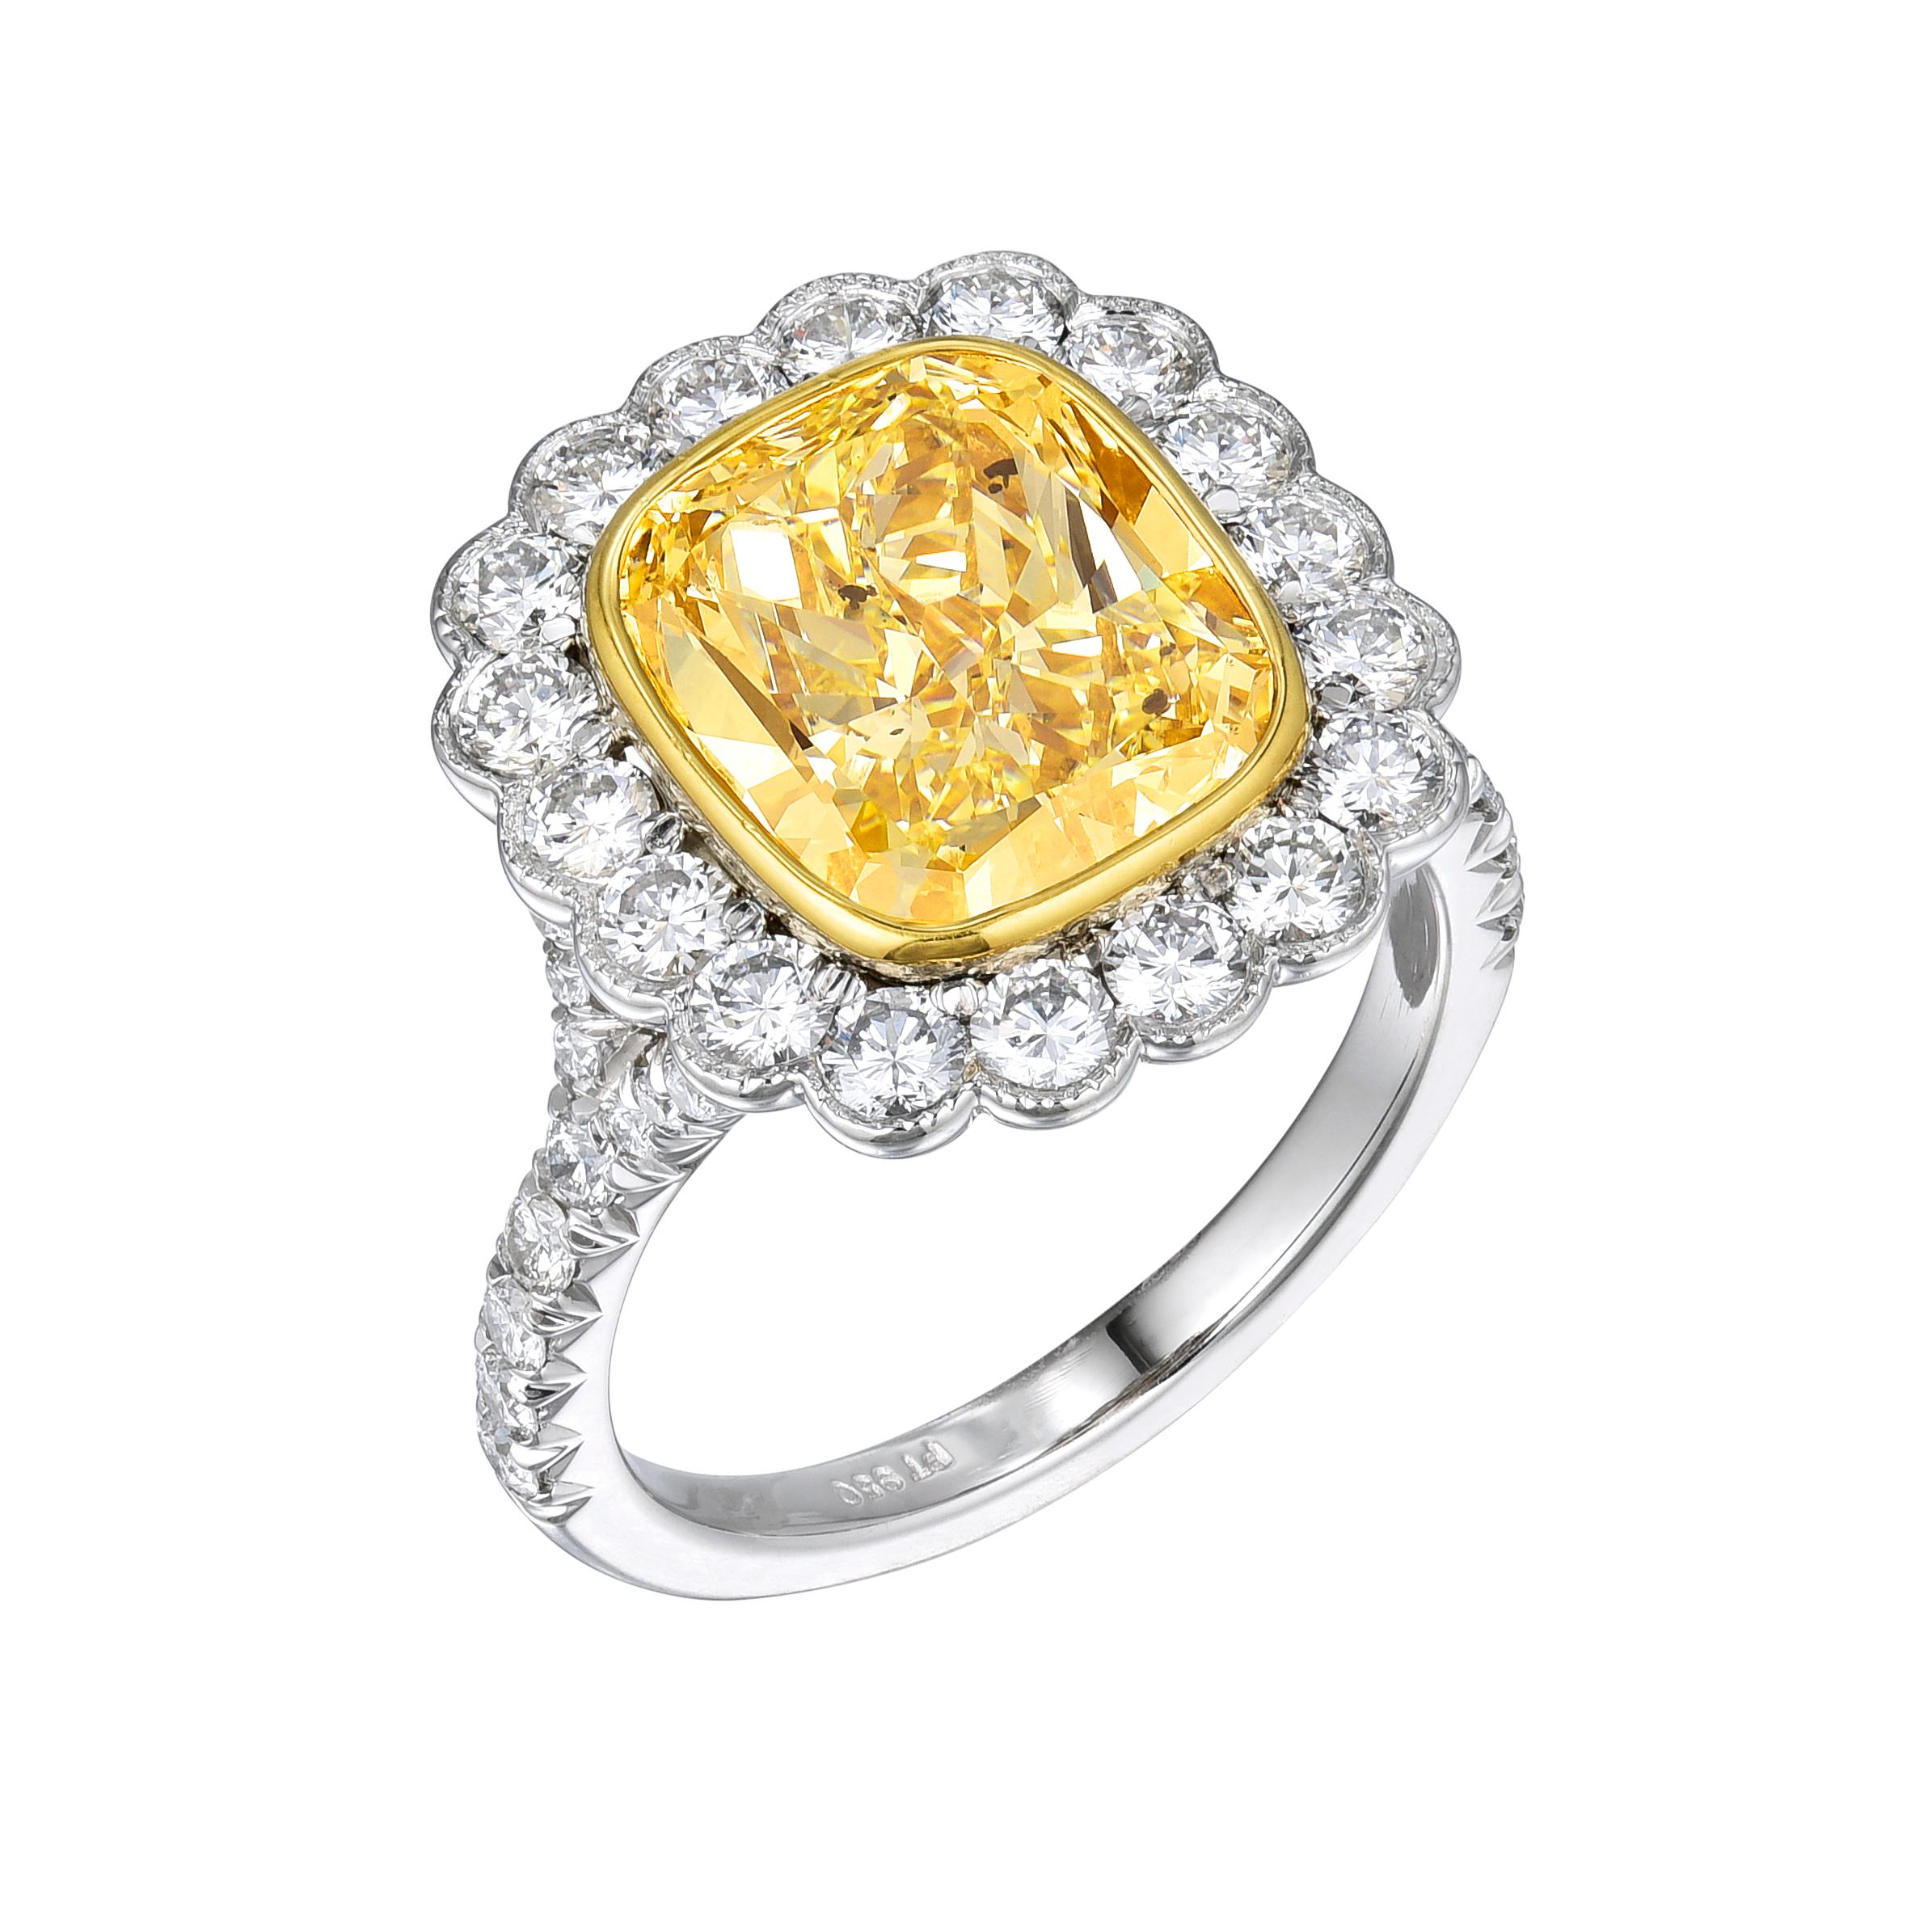 Diamond Platinum ring with GIA certificate, no.2155158881. Center stone: 4.07 ct Cushion cut Natural Fancy Light Yellow SI2 diamond, 10.23 x 8.79 x 5.36 mm. Side stones: 1.00 ct Brilliant Round diamonds F-G VS1-SI1. Total carat weight: 5.07 ct.